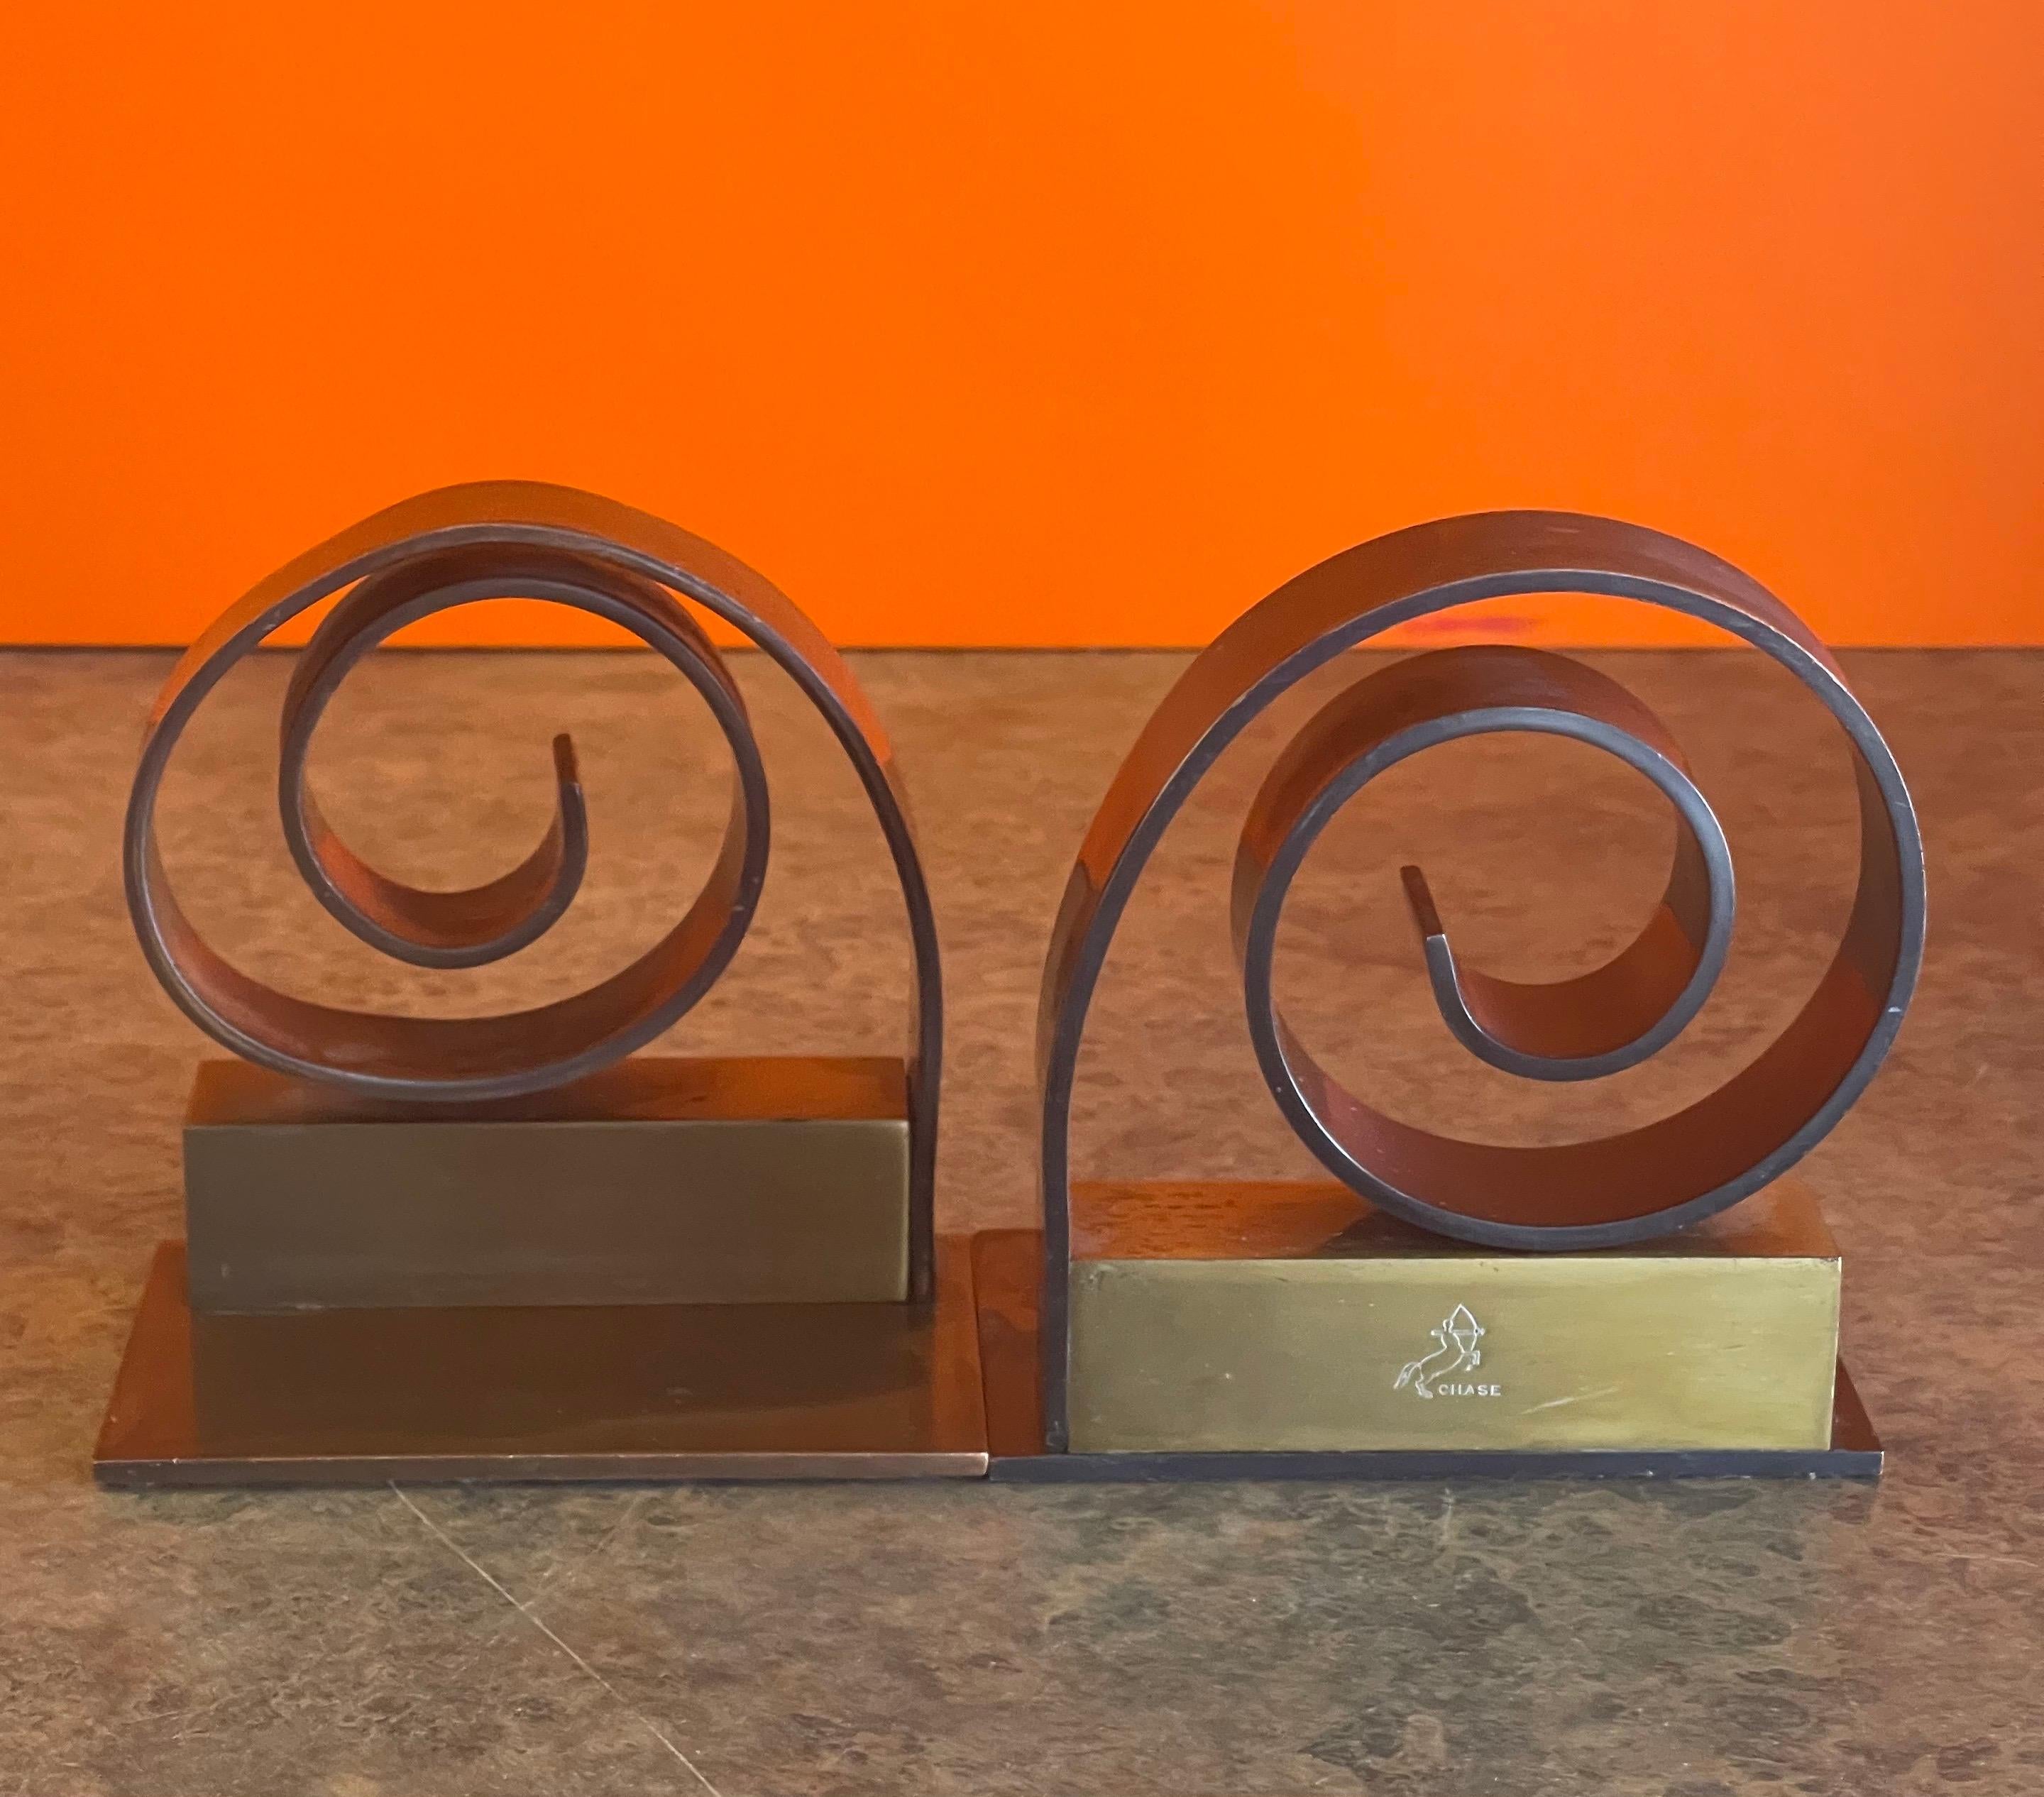 20th Century Pair of Machine Age Art Deco Bookends by Walter Von Nessen for Chase & Co.